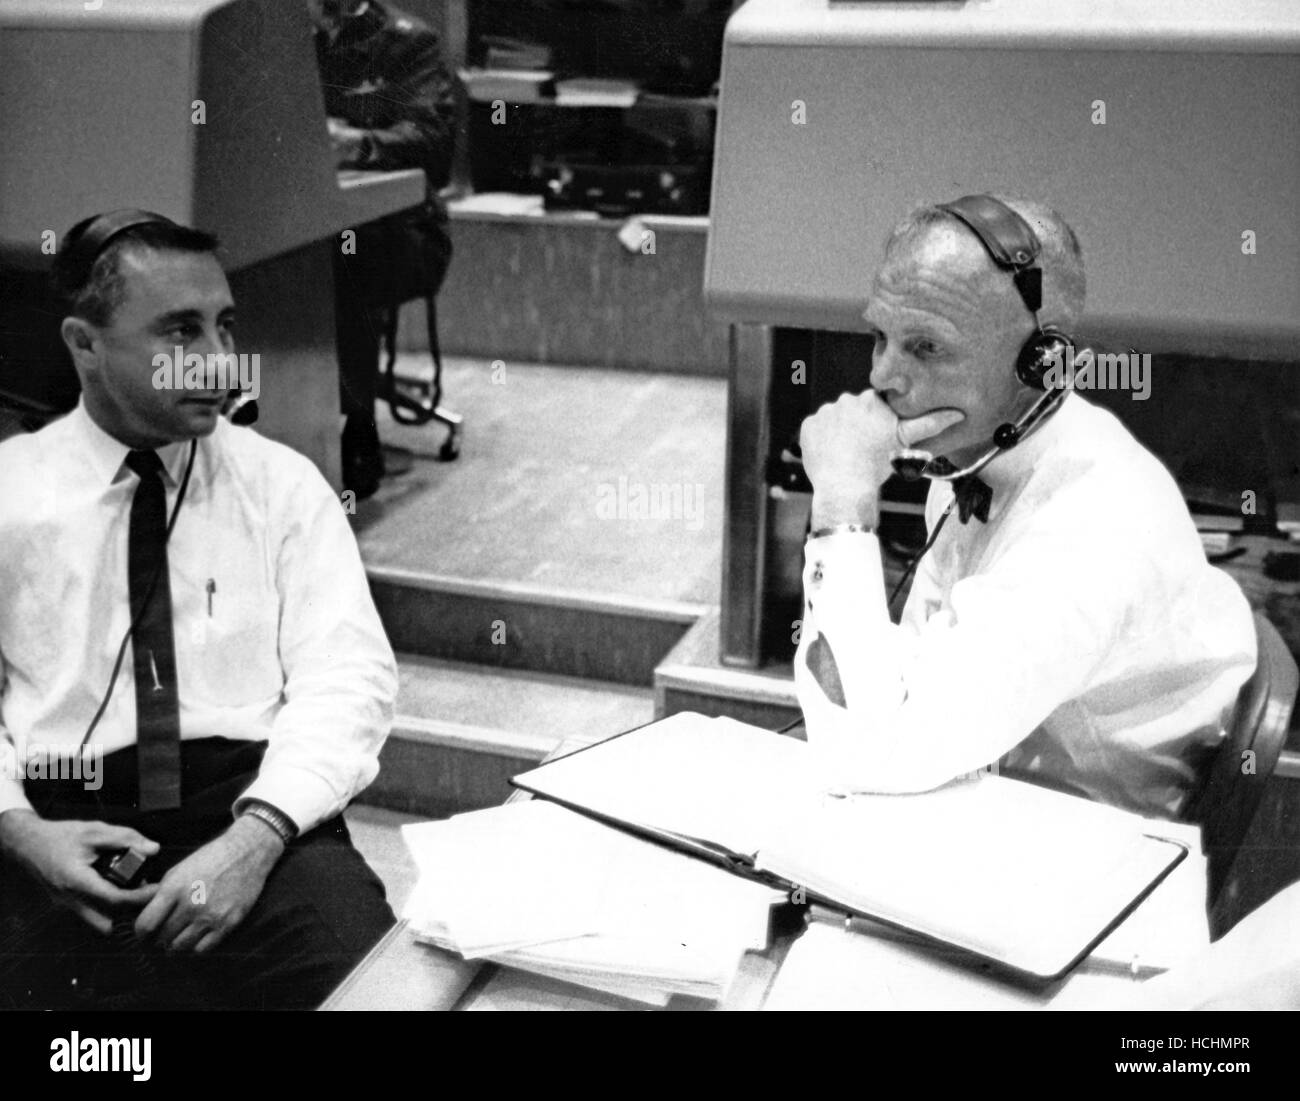 Veteran United States spacemen await word from Project Mercury Astronaut M. Scott Carpenter as he returns to earth following 3 trips around the globe, at Cape Canaveral, Florida, May 24, 1962. Left; Virgil I. 'Gus' Grissom, pilot of Mercury's second suborbital mission, and right; John H. Glenn, Jr., first U.S. orbital astronaut. Grisson served as Capsule Communicator, assisted by Glenn, during Carpenter's flight. Credit: NASA via CNP /MediaPunch Stock Photo